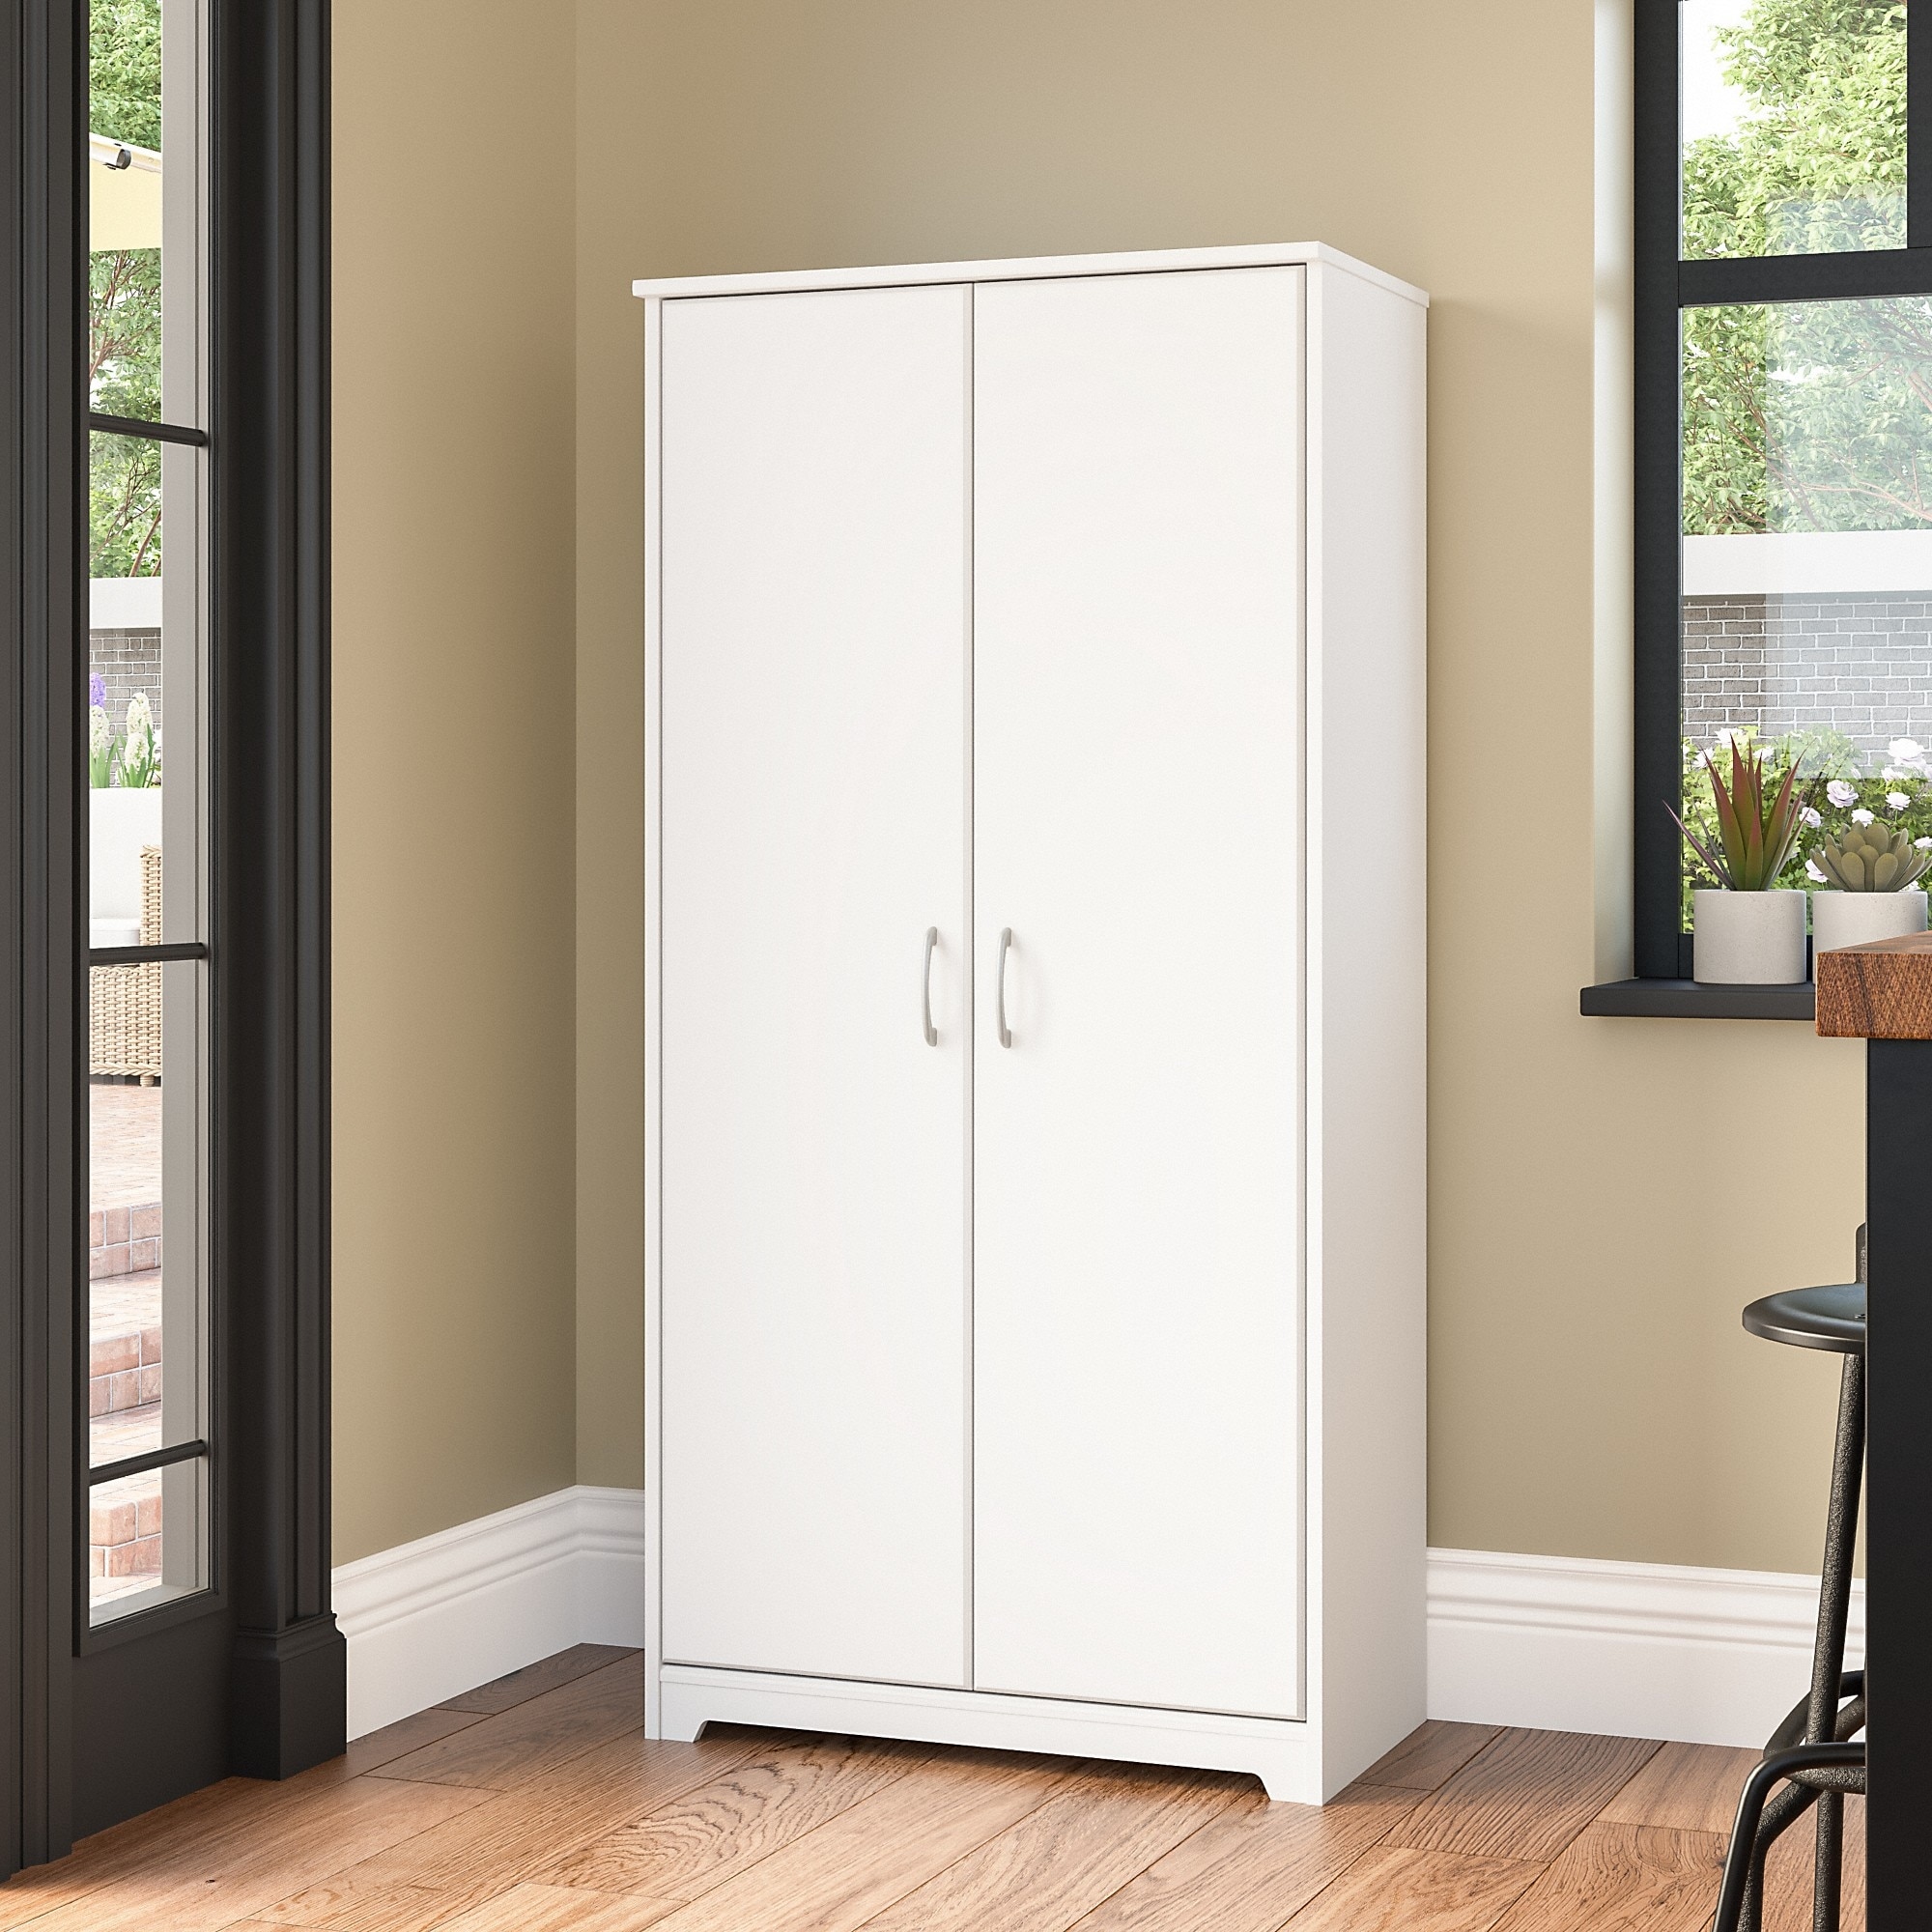 https://ak1.ostkcdn.com/images/products/is/images/direct/3b734d5af5ab90b04cb3f34f54fcbeffff2a02e6/Cabot-Tall-Kitchen-Pantry-Cabinet-with-Doors-by-Bush-Furniture.jpg